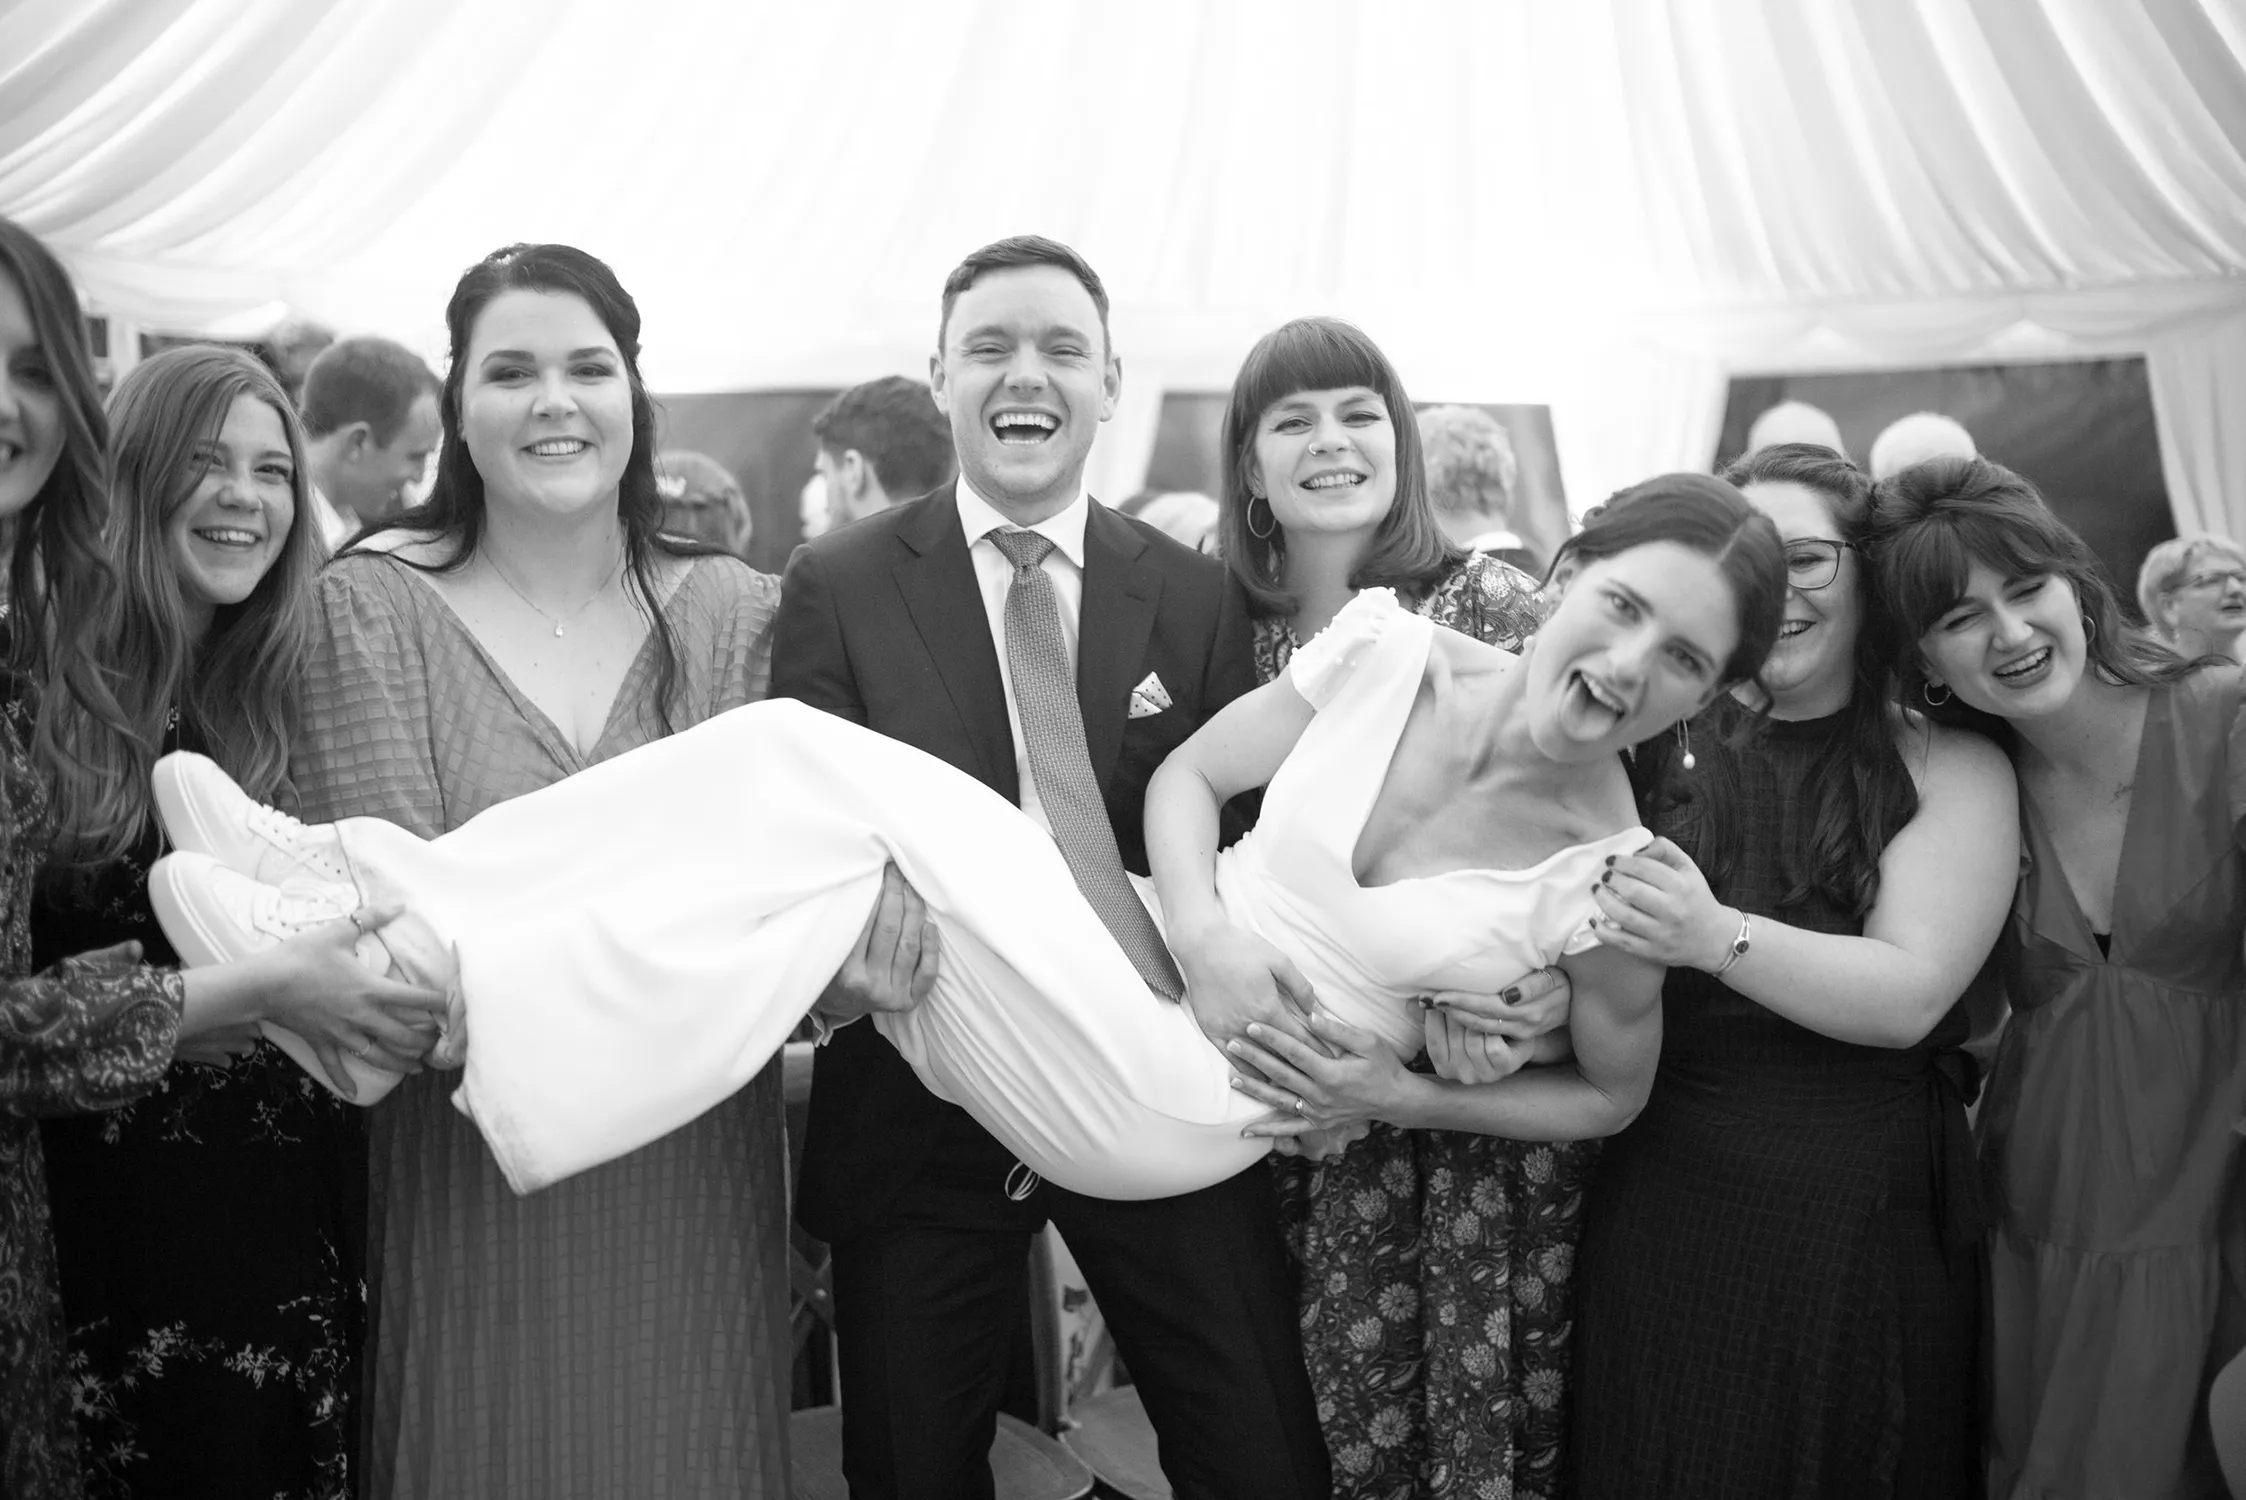 A jubilant wedding scene photographed by John Dolan, distinguished in the Top Wedding Photographers of 2024, captures a groom carrying his bride amidst a group of laughing friends, all sharing in the couple’s joy on their big day.